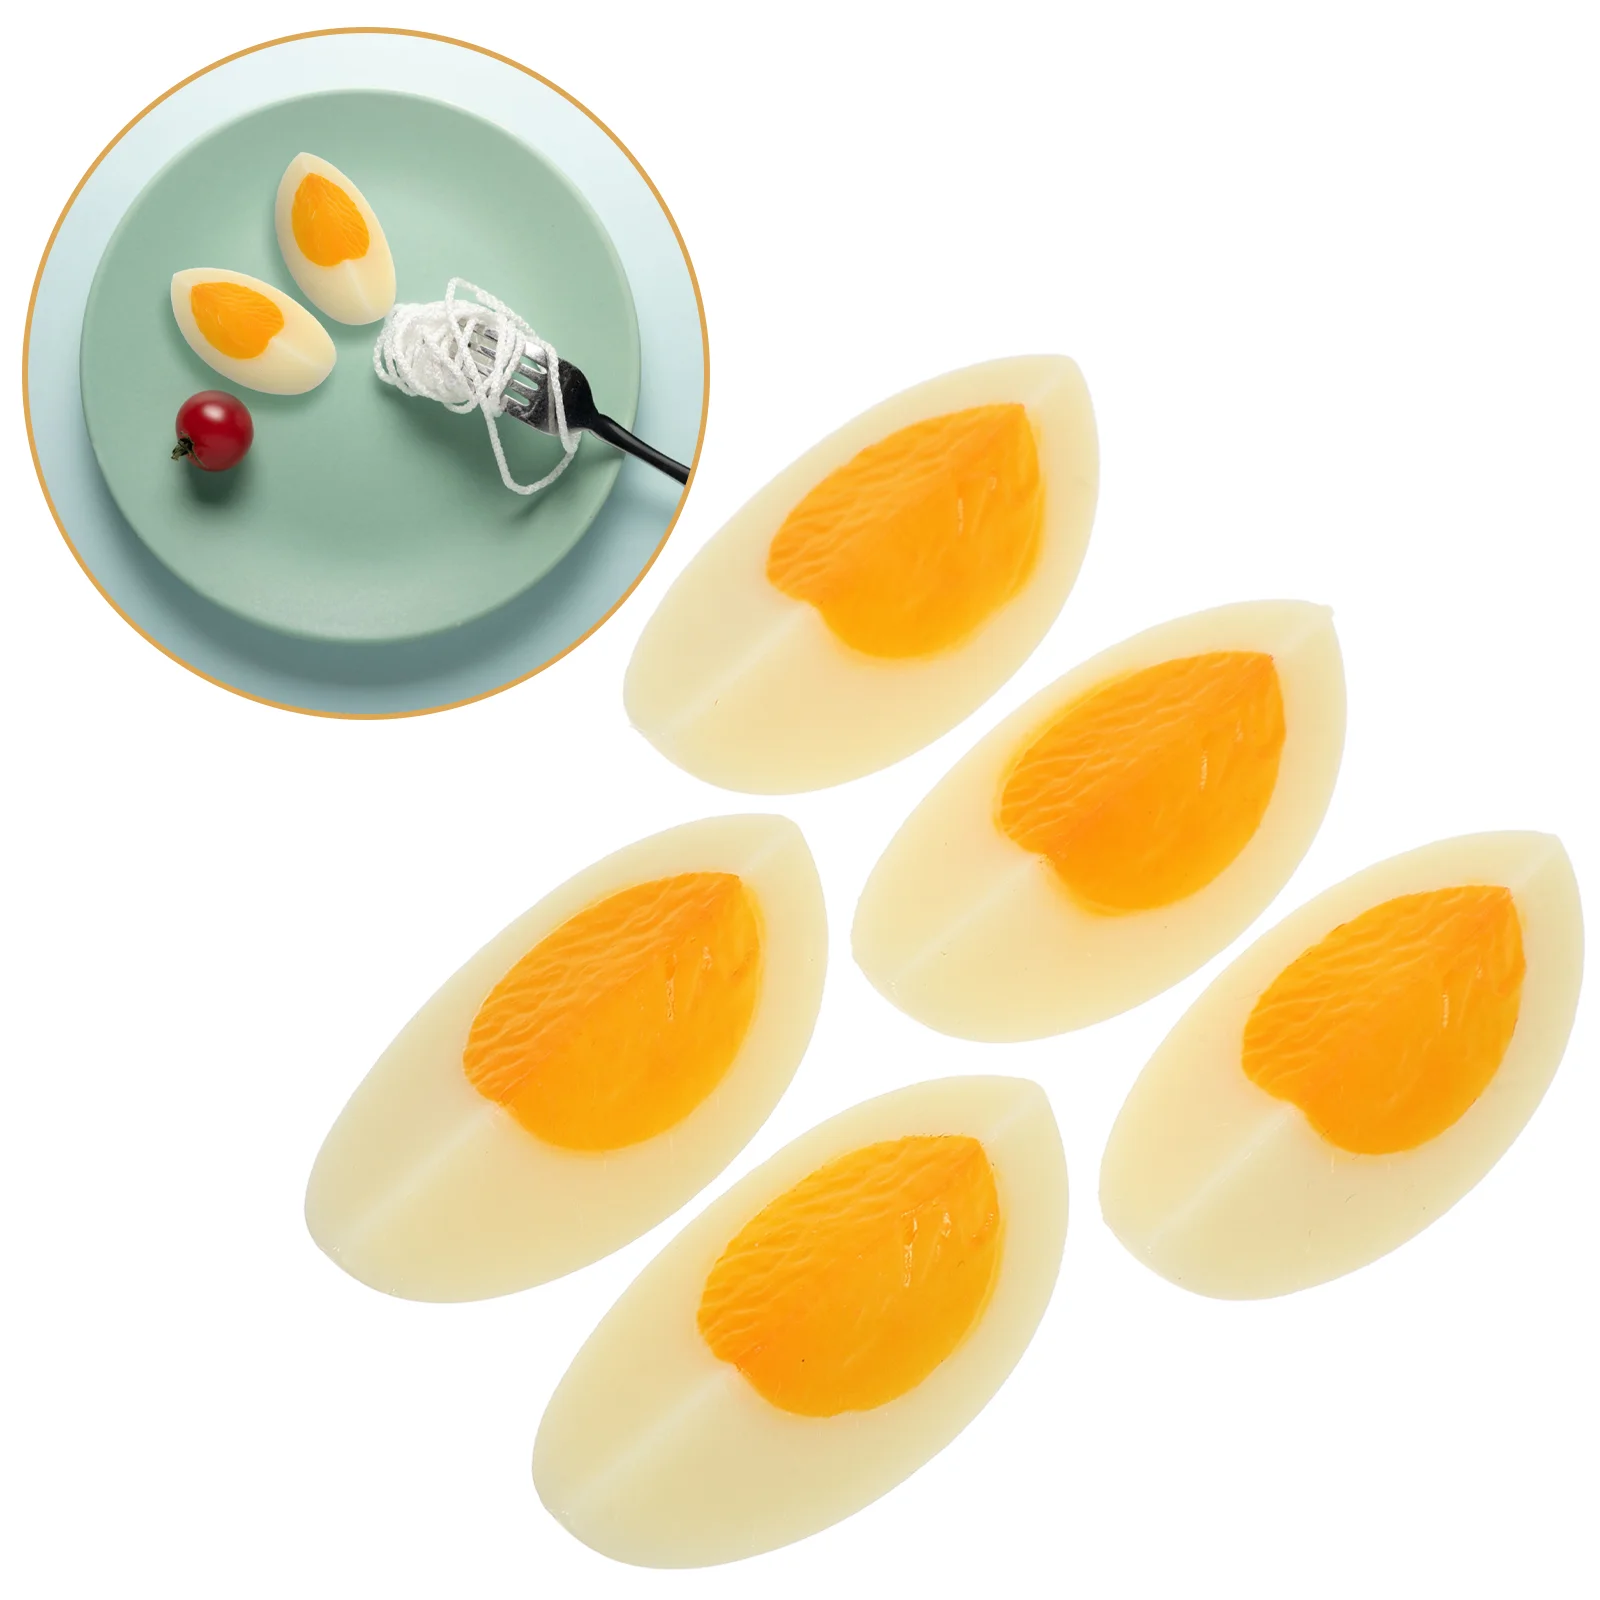 

5 Pcs Simulated Boiled Eggs Food Models Breakfast Foods Fake Slices Cartoon Kitchen Artificial